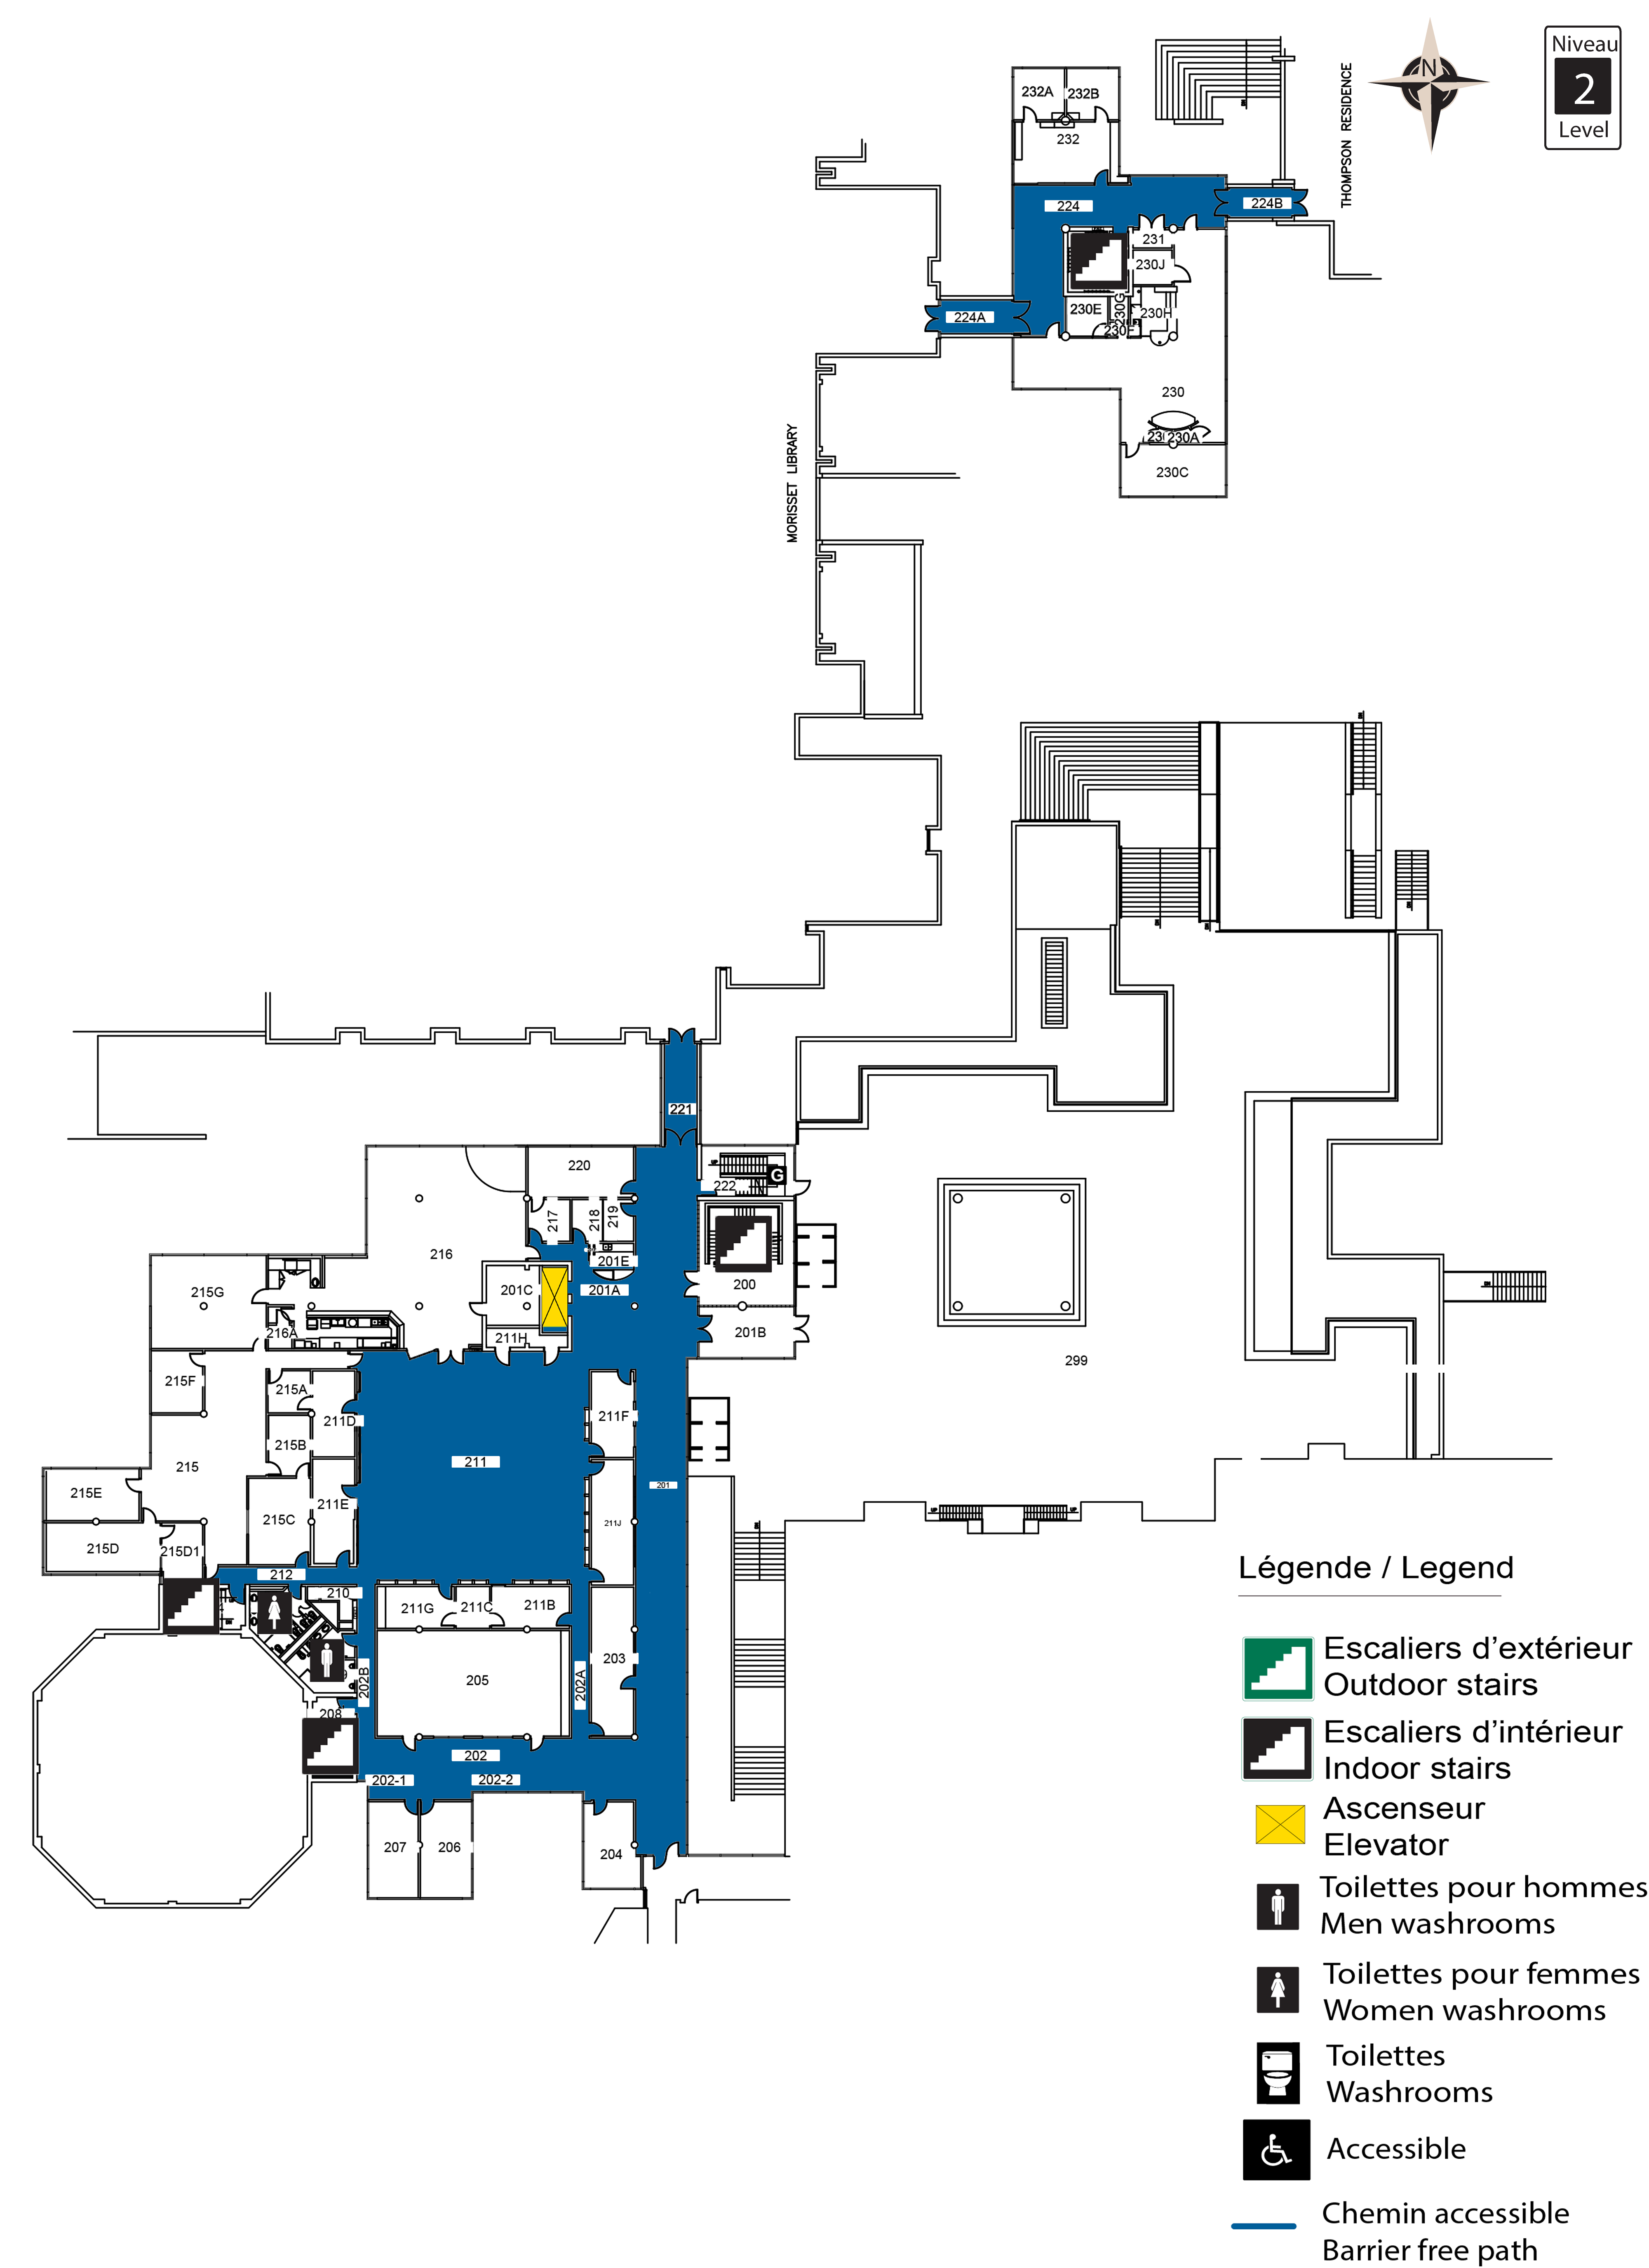 Accessible map of UCU level 2